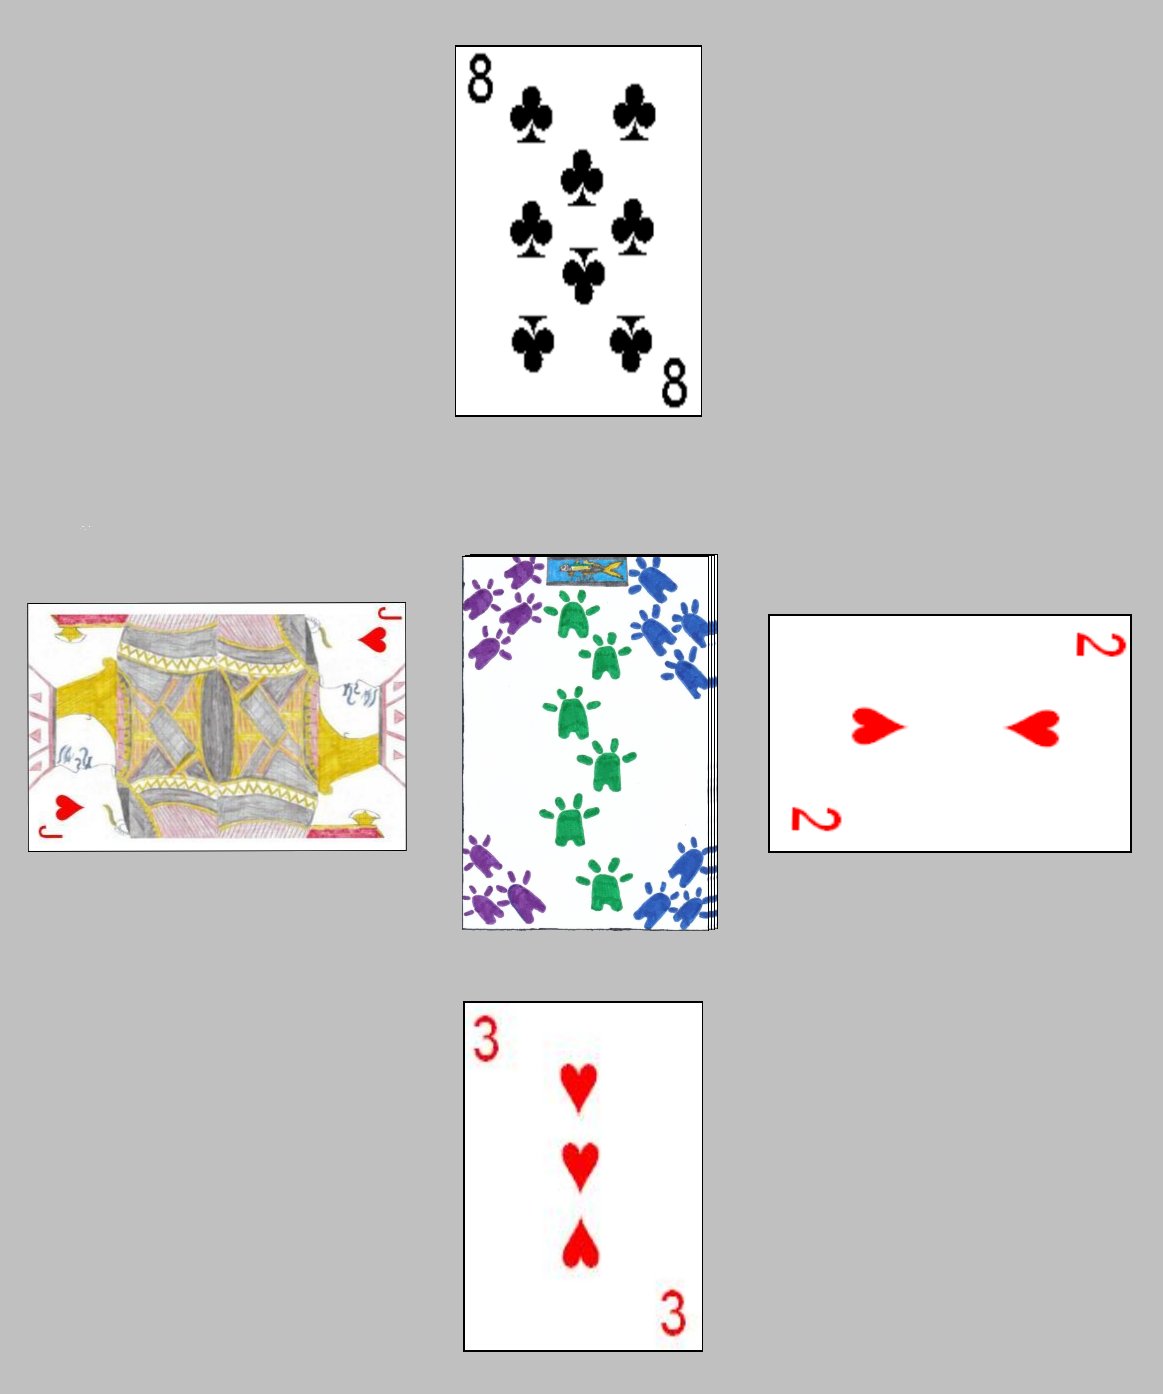 Possible Initial Layout for Kings in the Corner